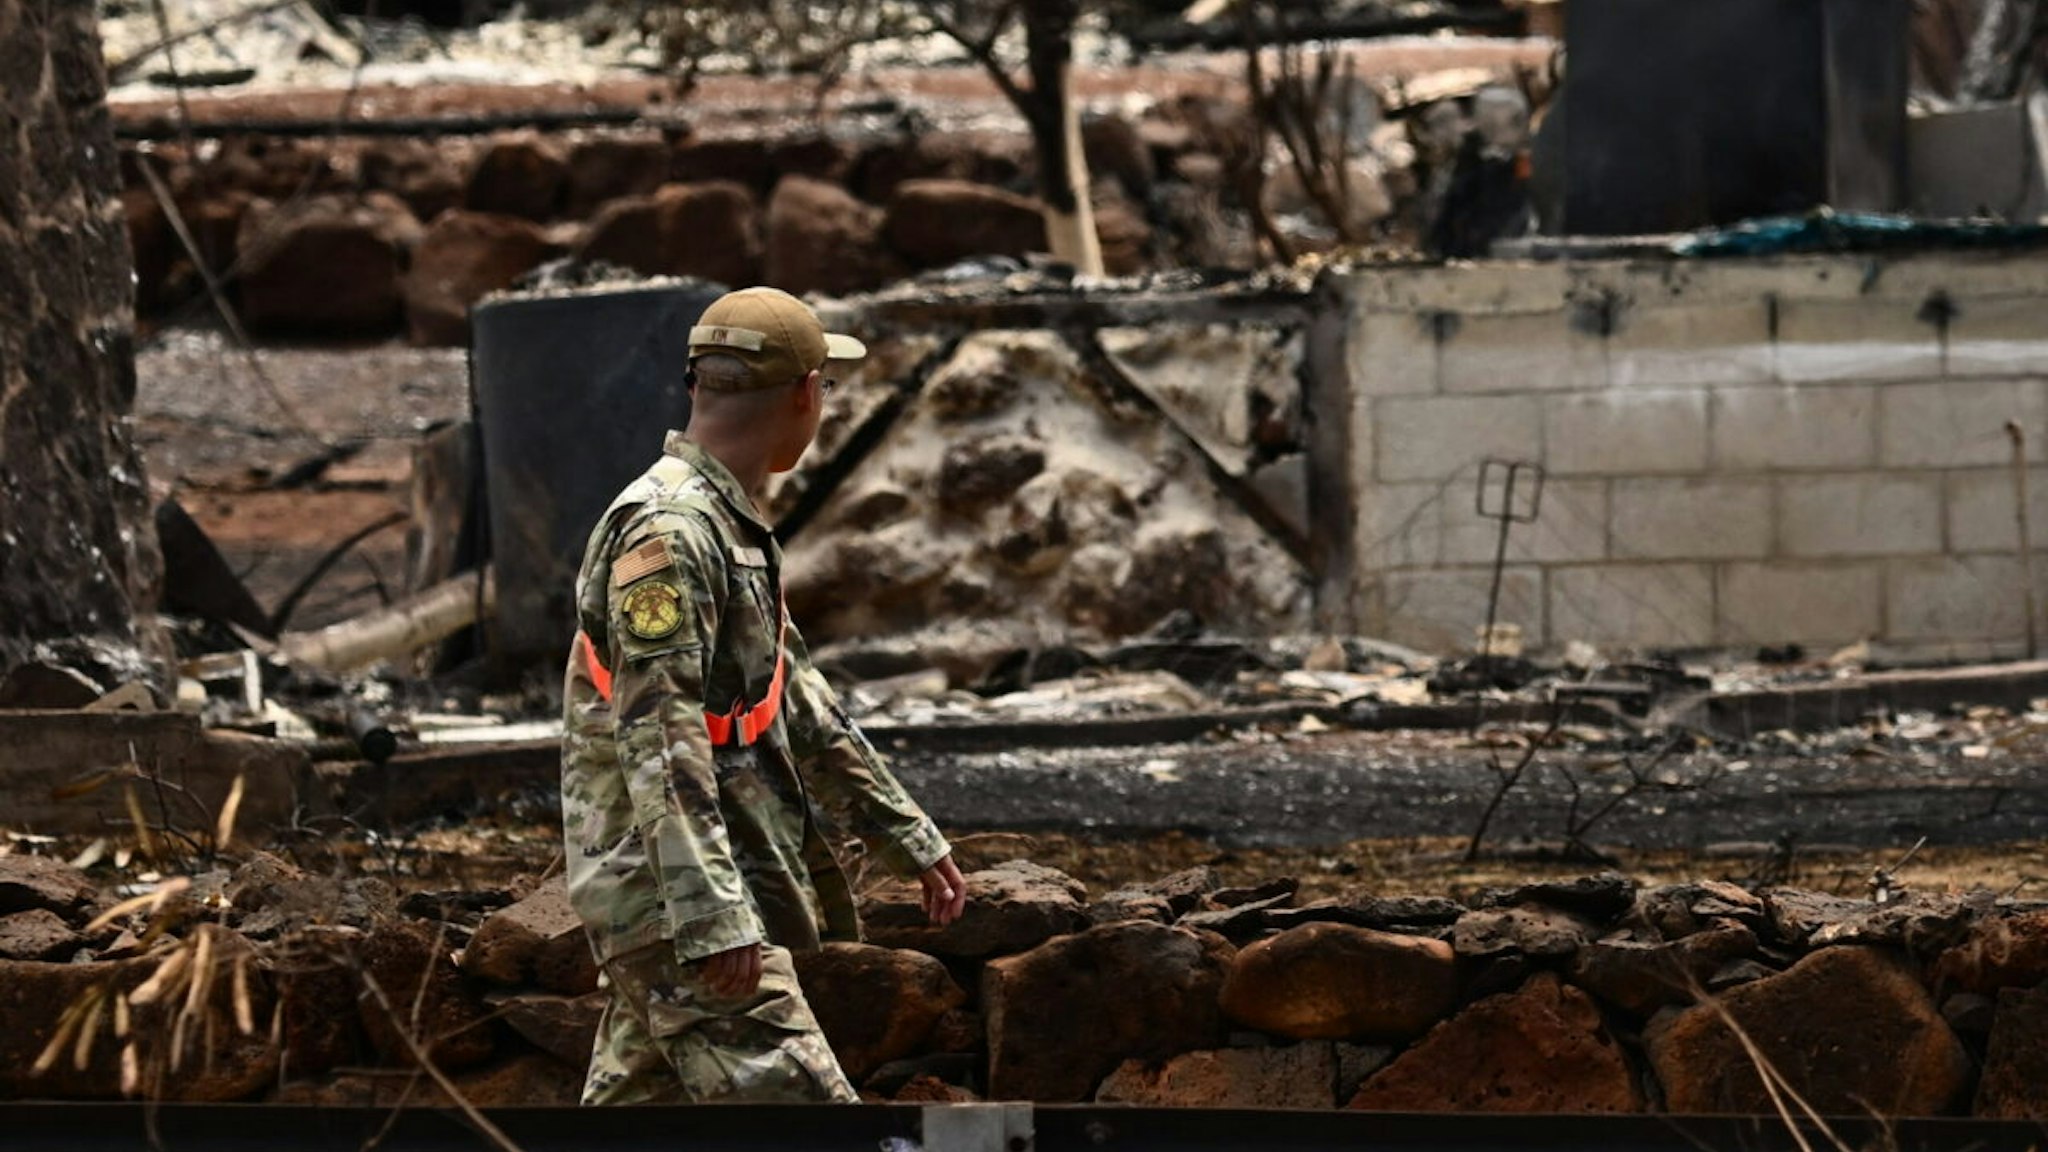 A member of the National Guard walks through a charred neighborhood in the aftermath of the Maui wildfires in Lahaina, Hawaii, on August 16, 2023. The number of people known to have died in the horrific wildfire that levelled a Hawaiian town reached 106 on August 15, authorities said, as a makeshift morgue was expanded to deal with the tragedy. US President Joe Biden will head to fire-ravaged Hawaii on August 21 to meet with survivors and first responders still hunting for victims, the White House said on August 16.